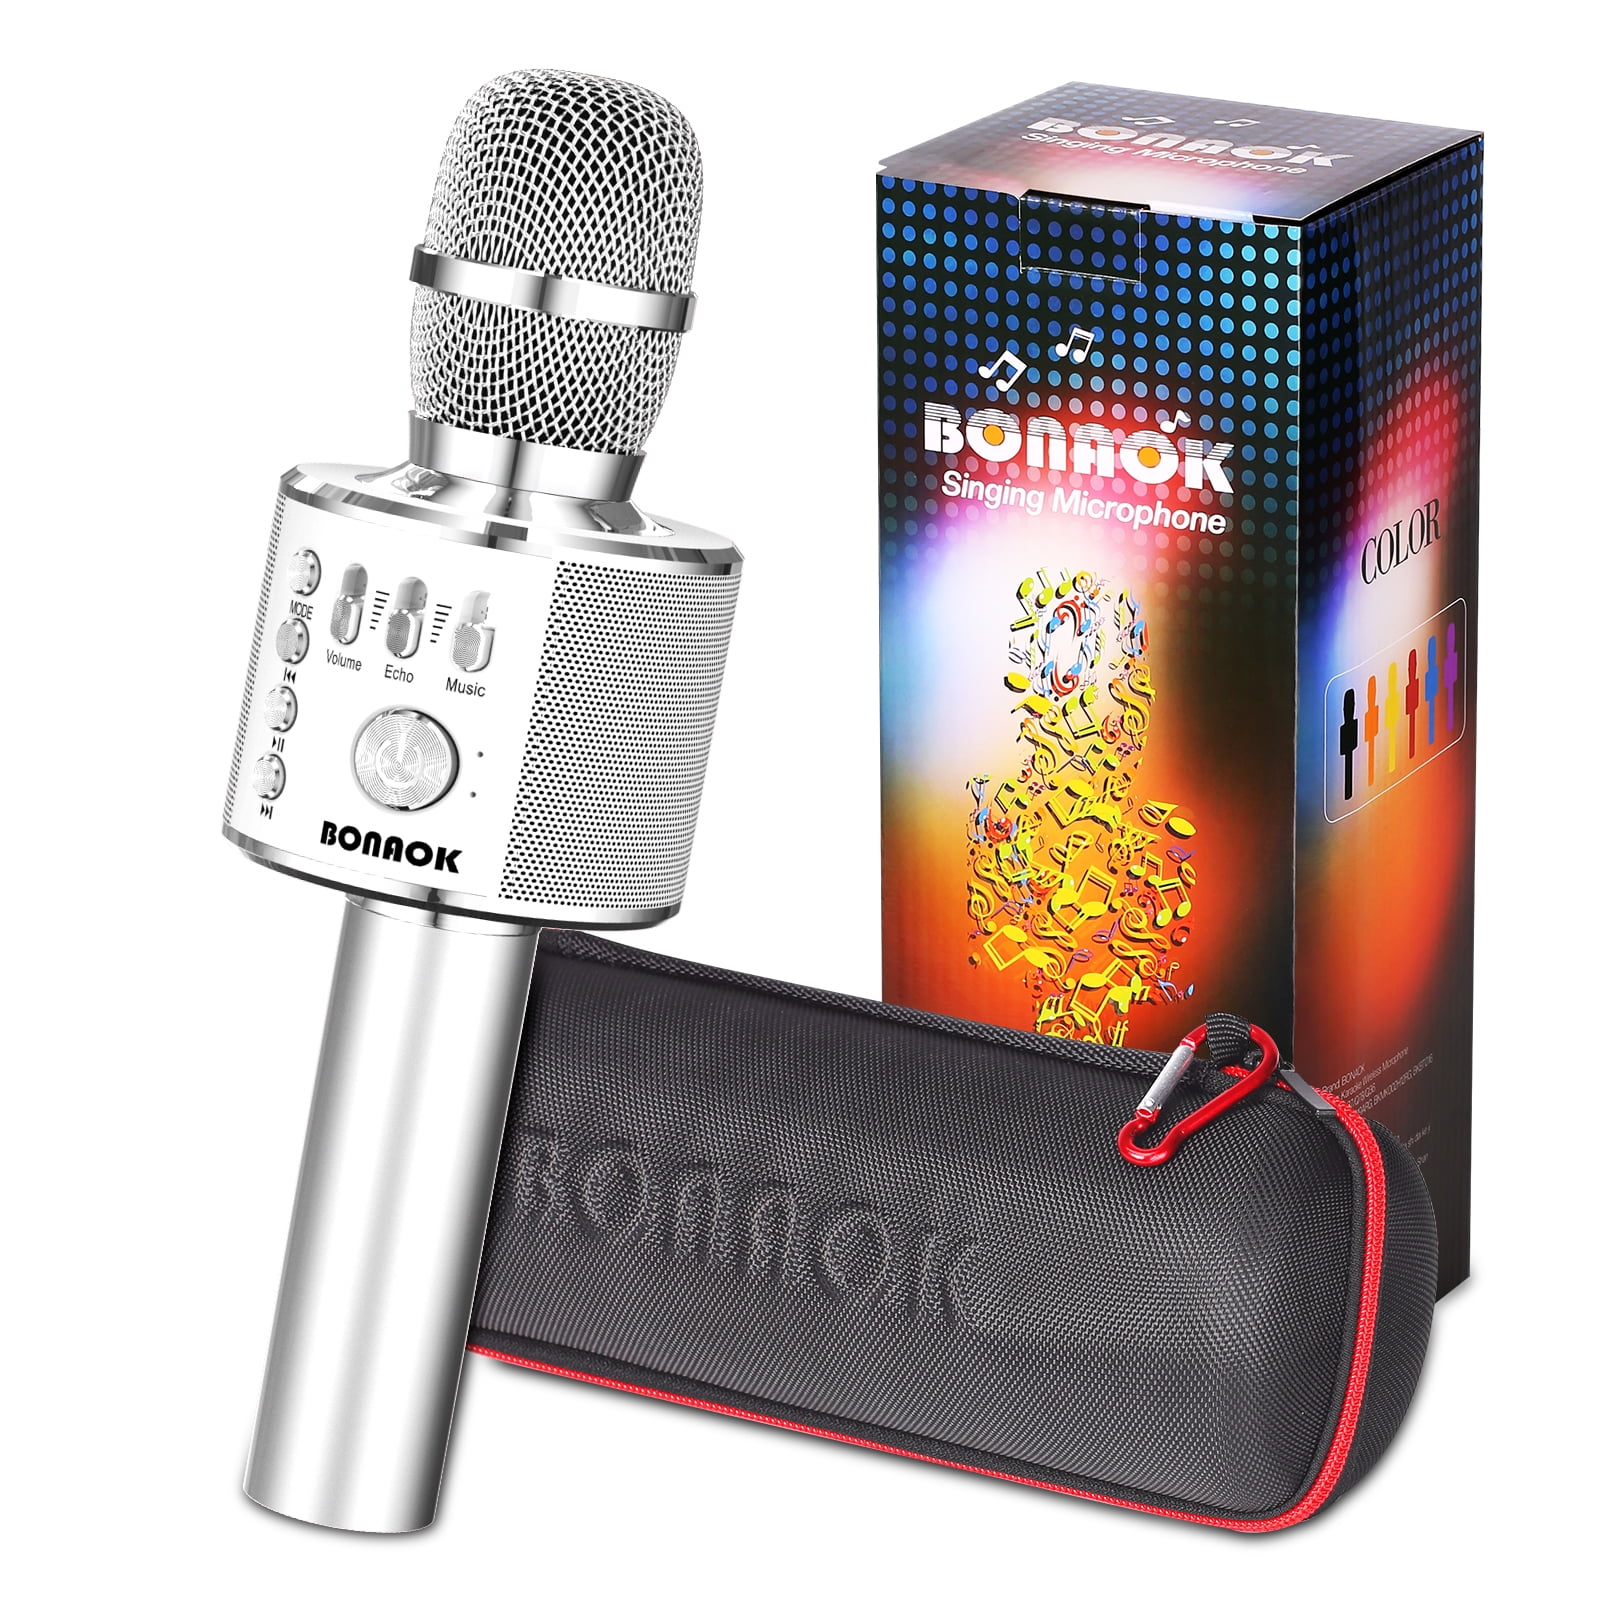 LED Lights BONAOK Bluetooth Wireless Karaoke Microphone with Dual Sing Portable Handheld Mic Speaker Machine for iPhone/Android/PC/Outdoor/Birthday/Home/Party（Space Gray） 